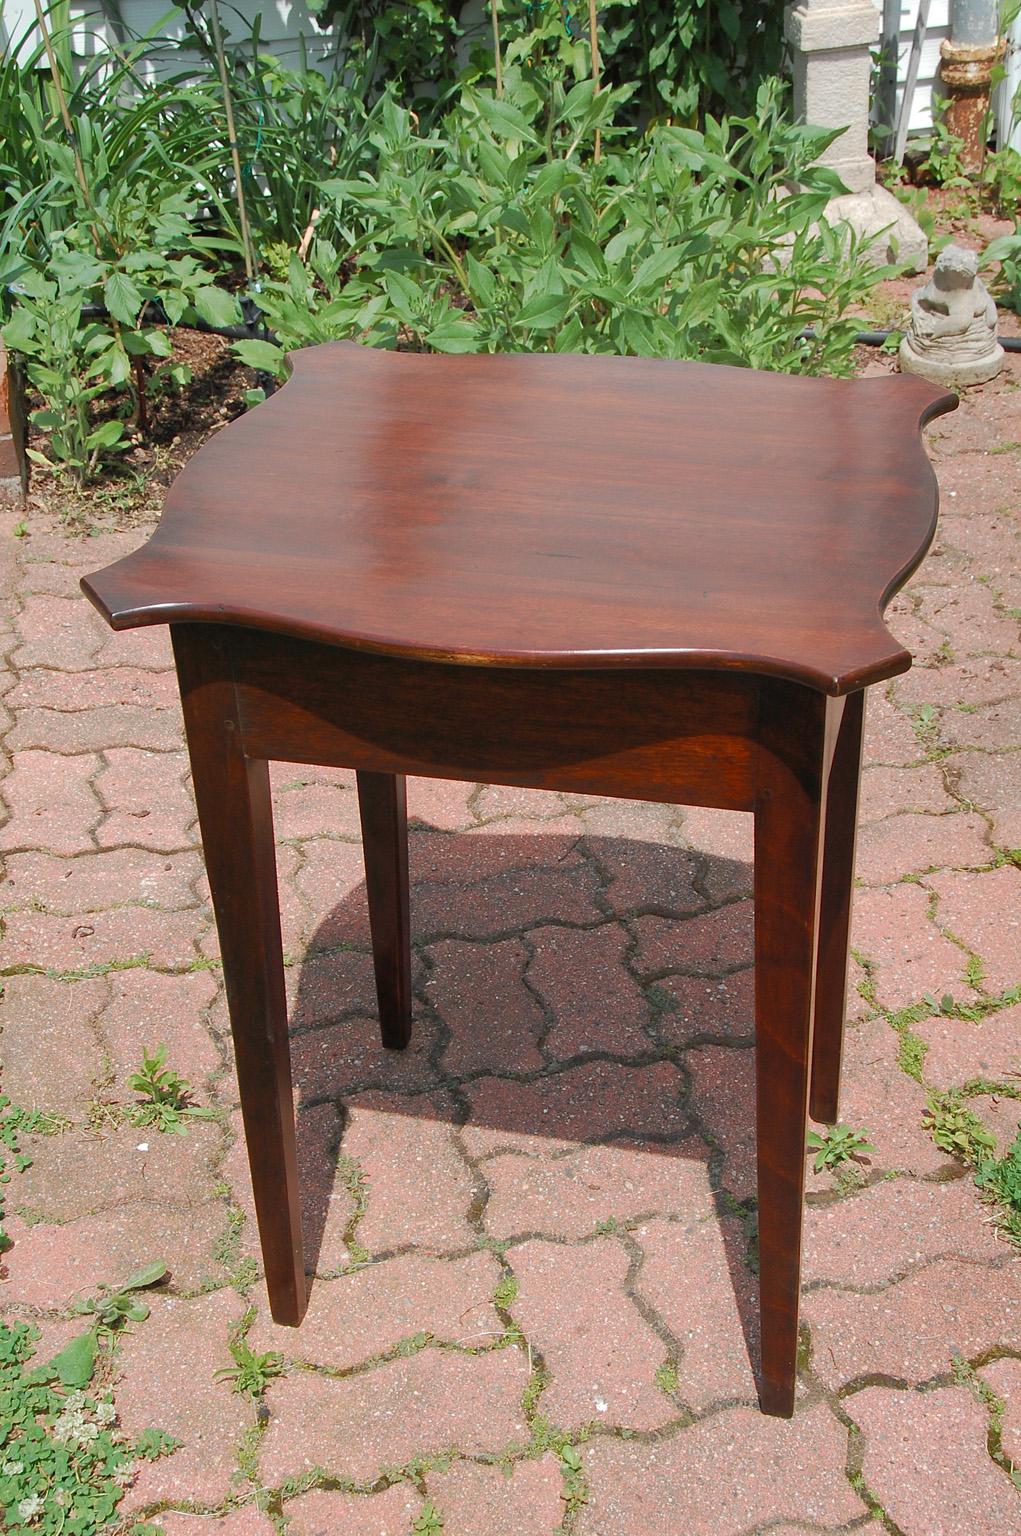 Mid-19th Century American One Drawer Serpentine Top Sidetable by Ariel Hinckley of Maine in 1836